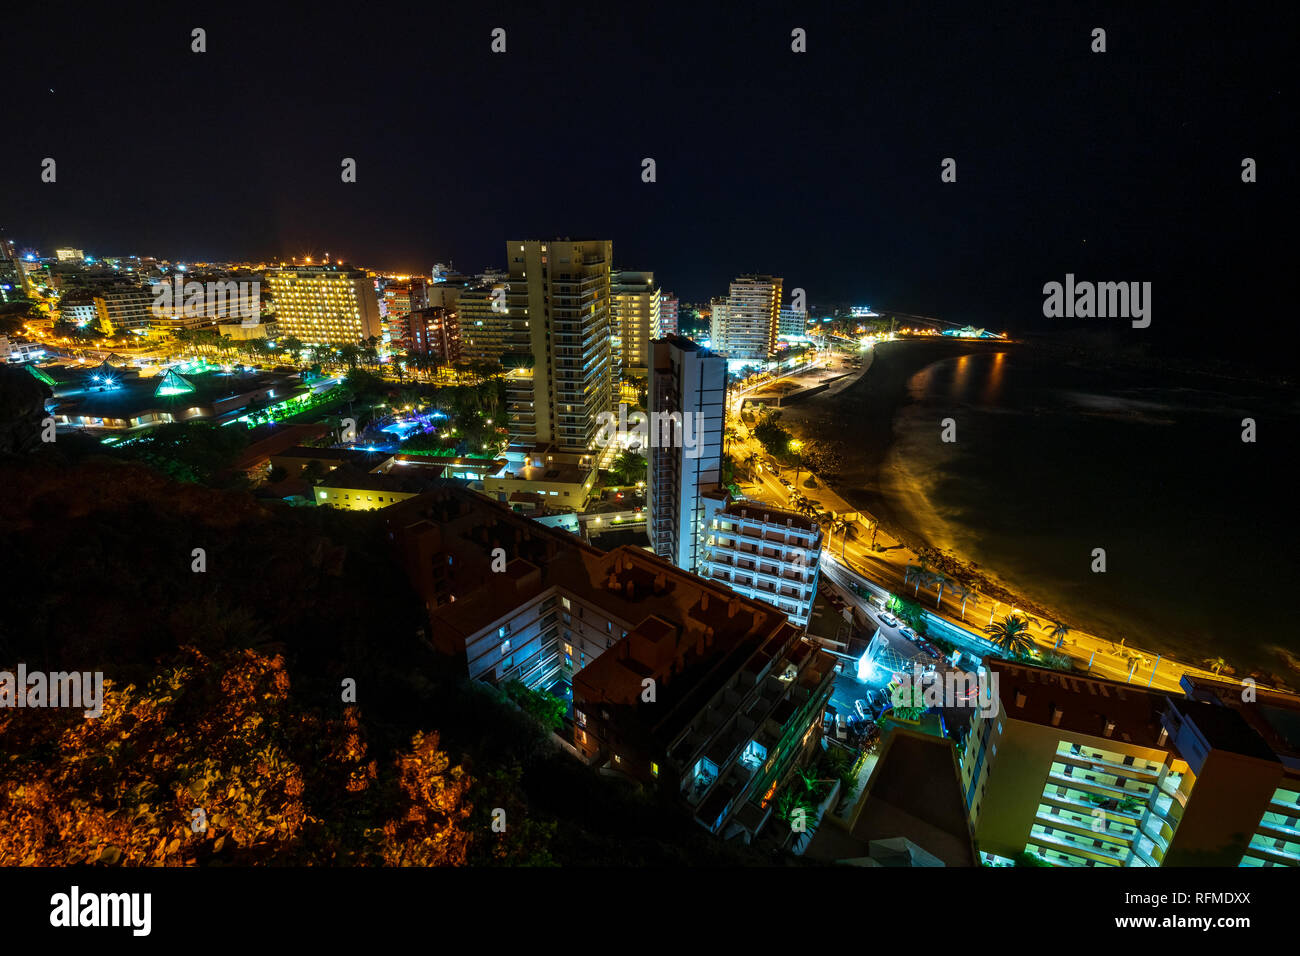 PUERTO DE LA CRUZ, CANARY ISLANDS, SPAIN - JULY 30, 2018: A view of the night city from a height. Viewpoint: Mirador La Paz. Stock Photo